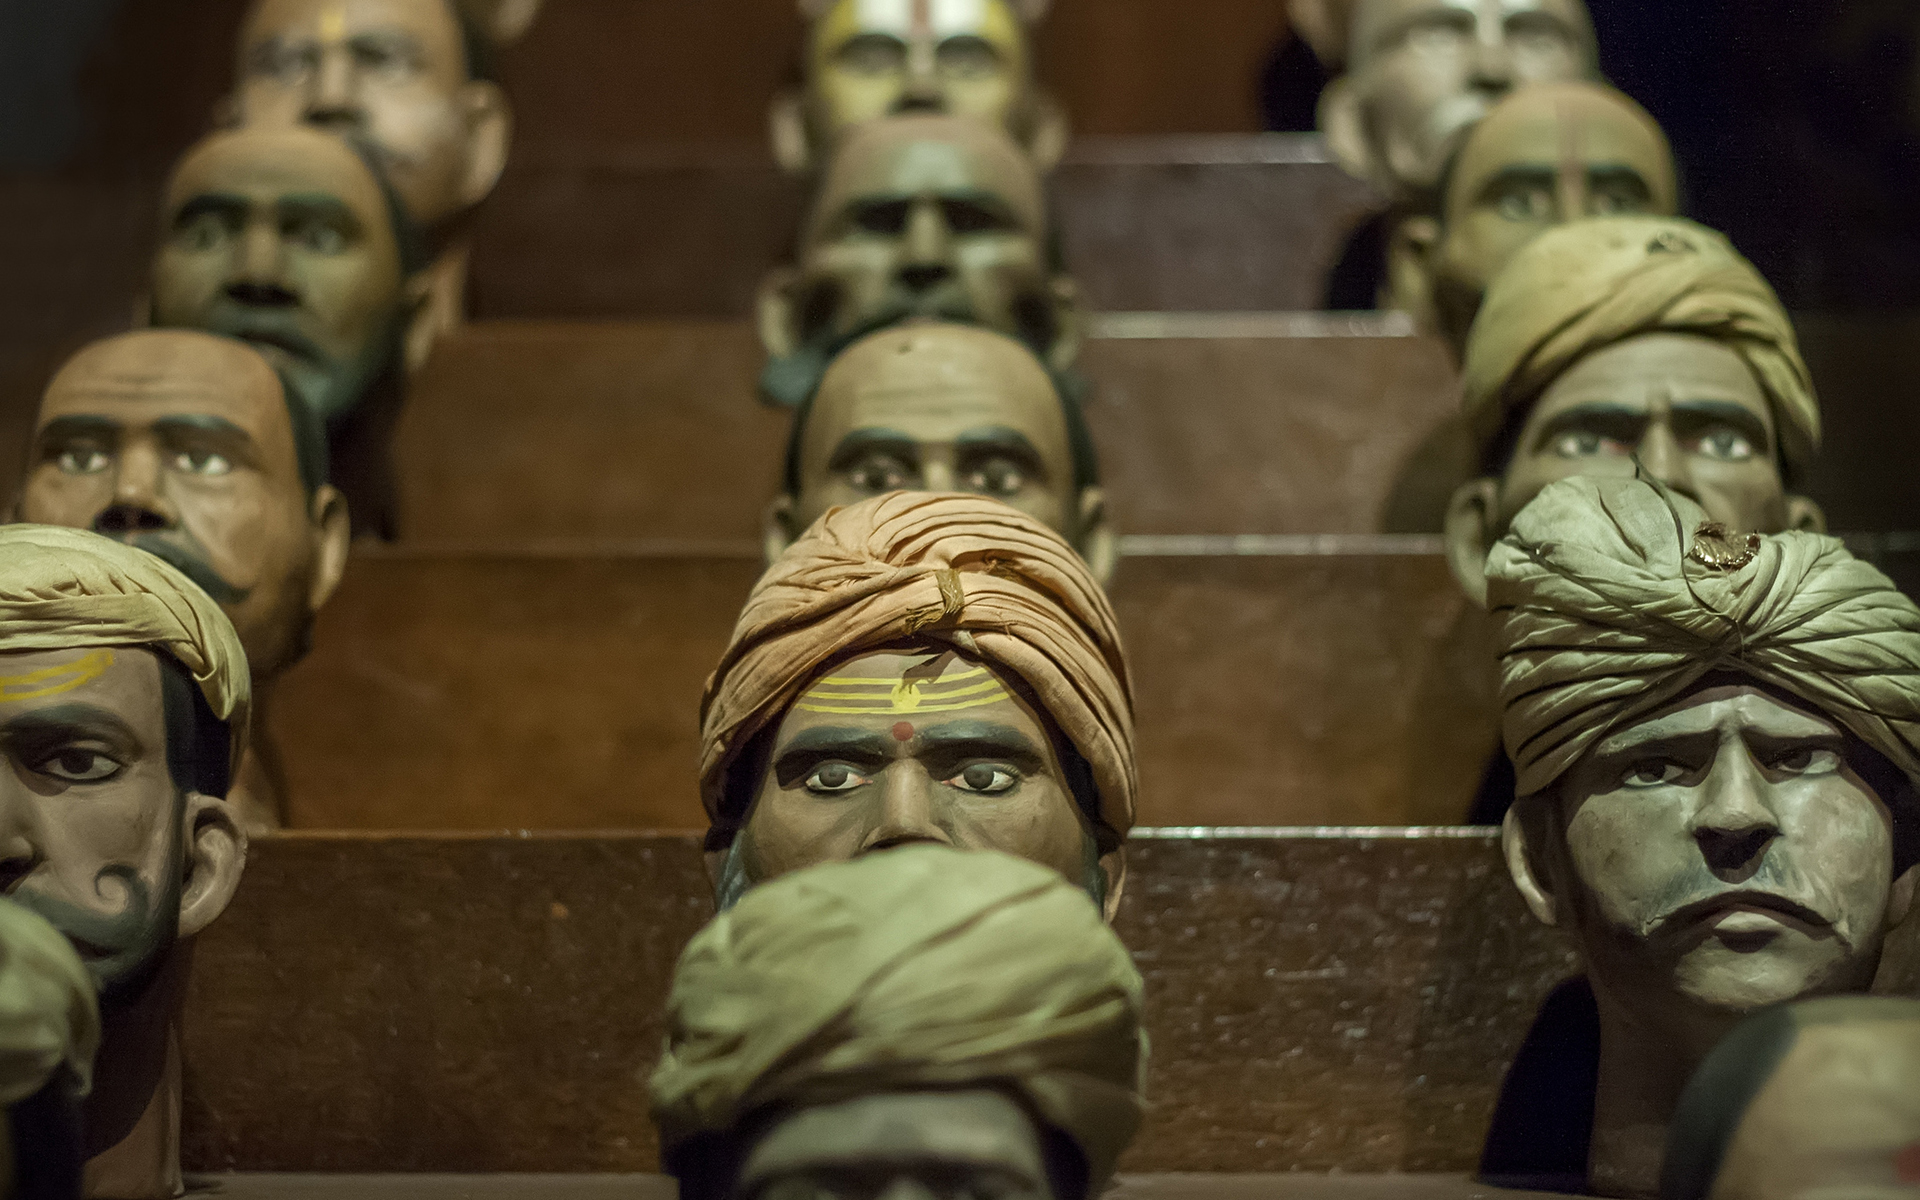 wooden, Heads, Horniman, Museum, London, Statues, Sculptures, Art, Artistic, Humor, Funny, Figure, Faces, Eyes, Stare, Pov, People, Men, Males, Scarf, Photography Wallpaper